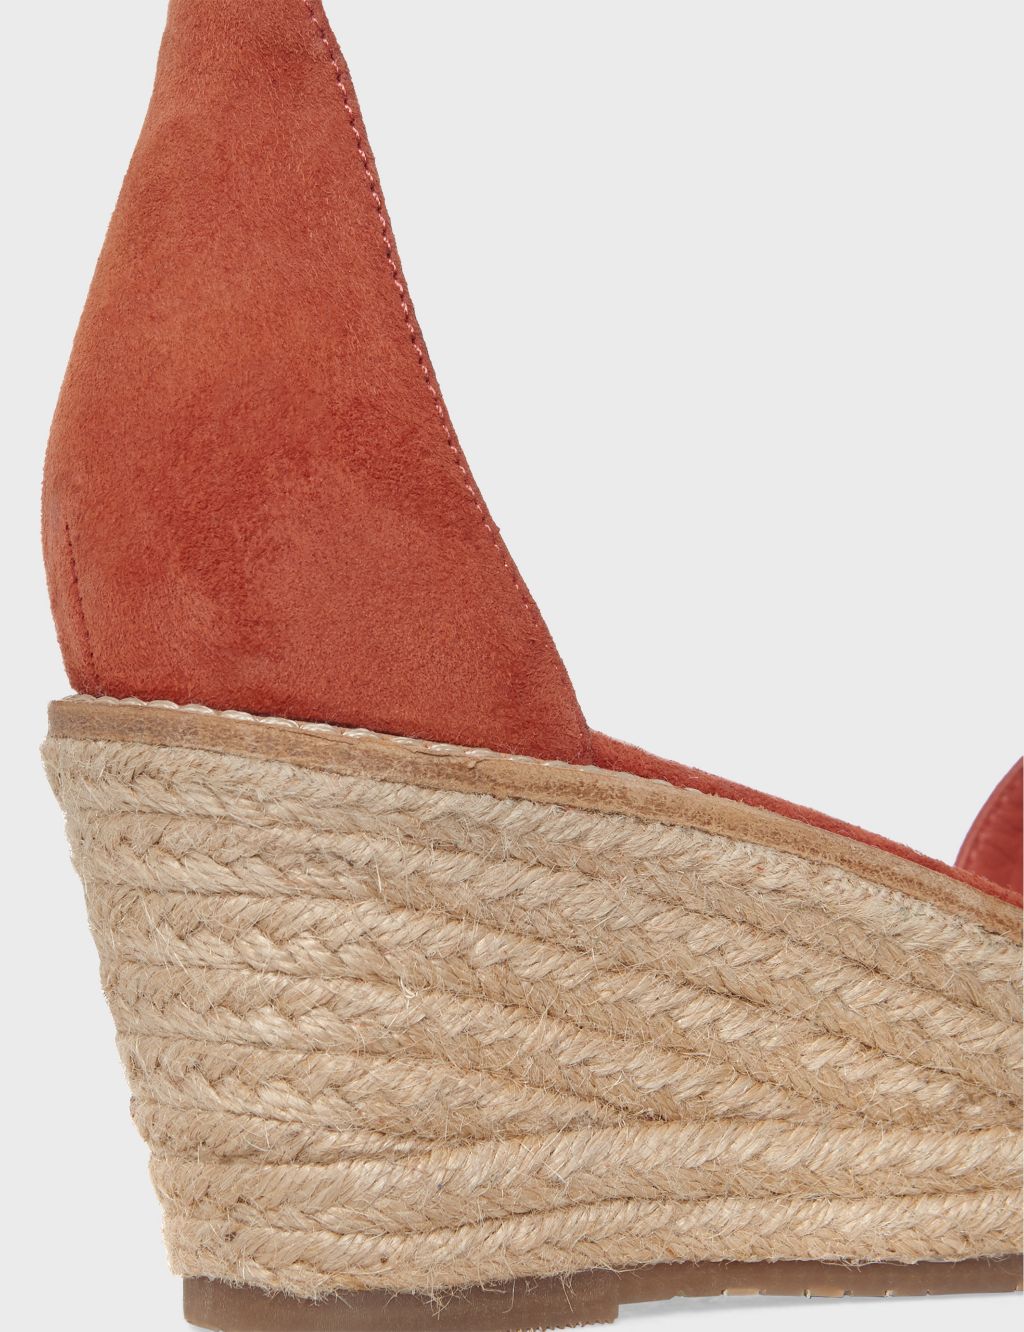 Suede Ankle Strap Wedge Espadrilles image 5